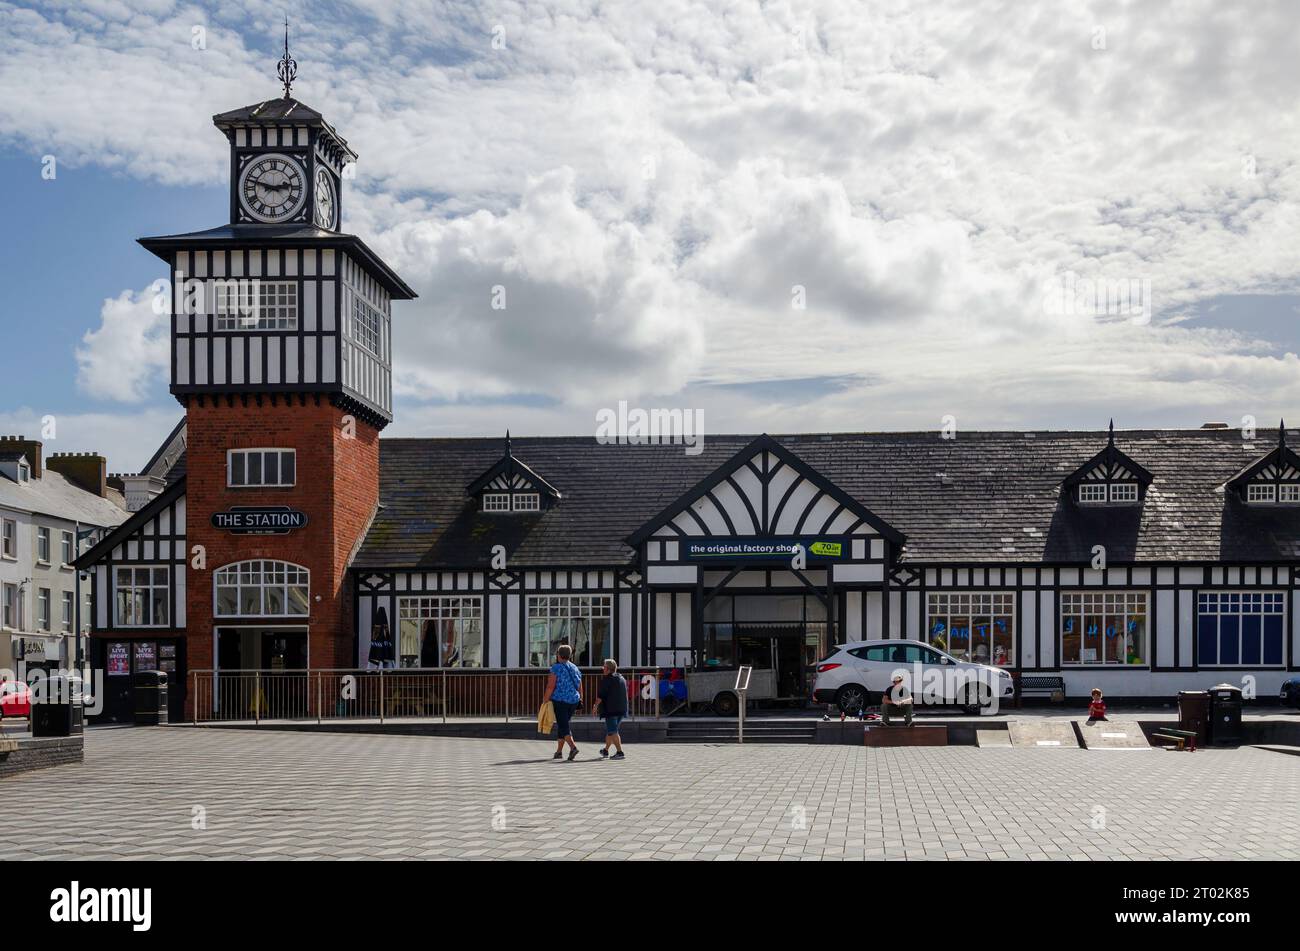 Portrush County Antrim Northern Ireland, September 06 2022 - Old mock Tudor railway station which is now a retail unit factory shop Stock Photo